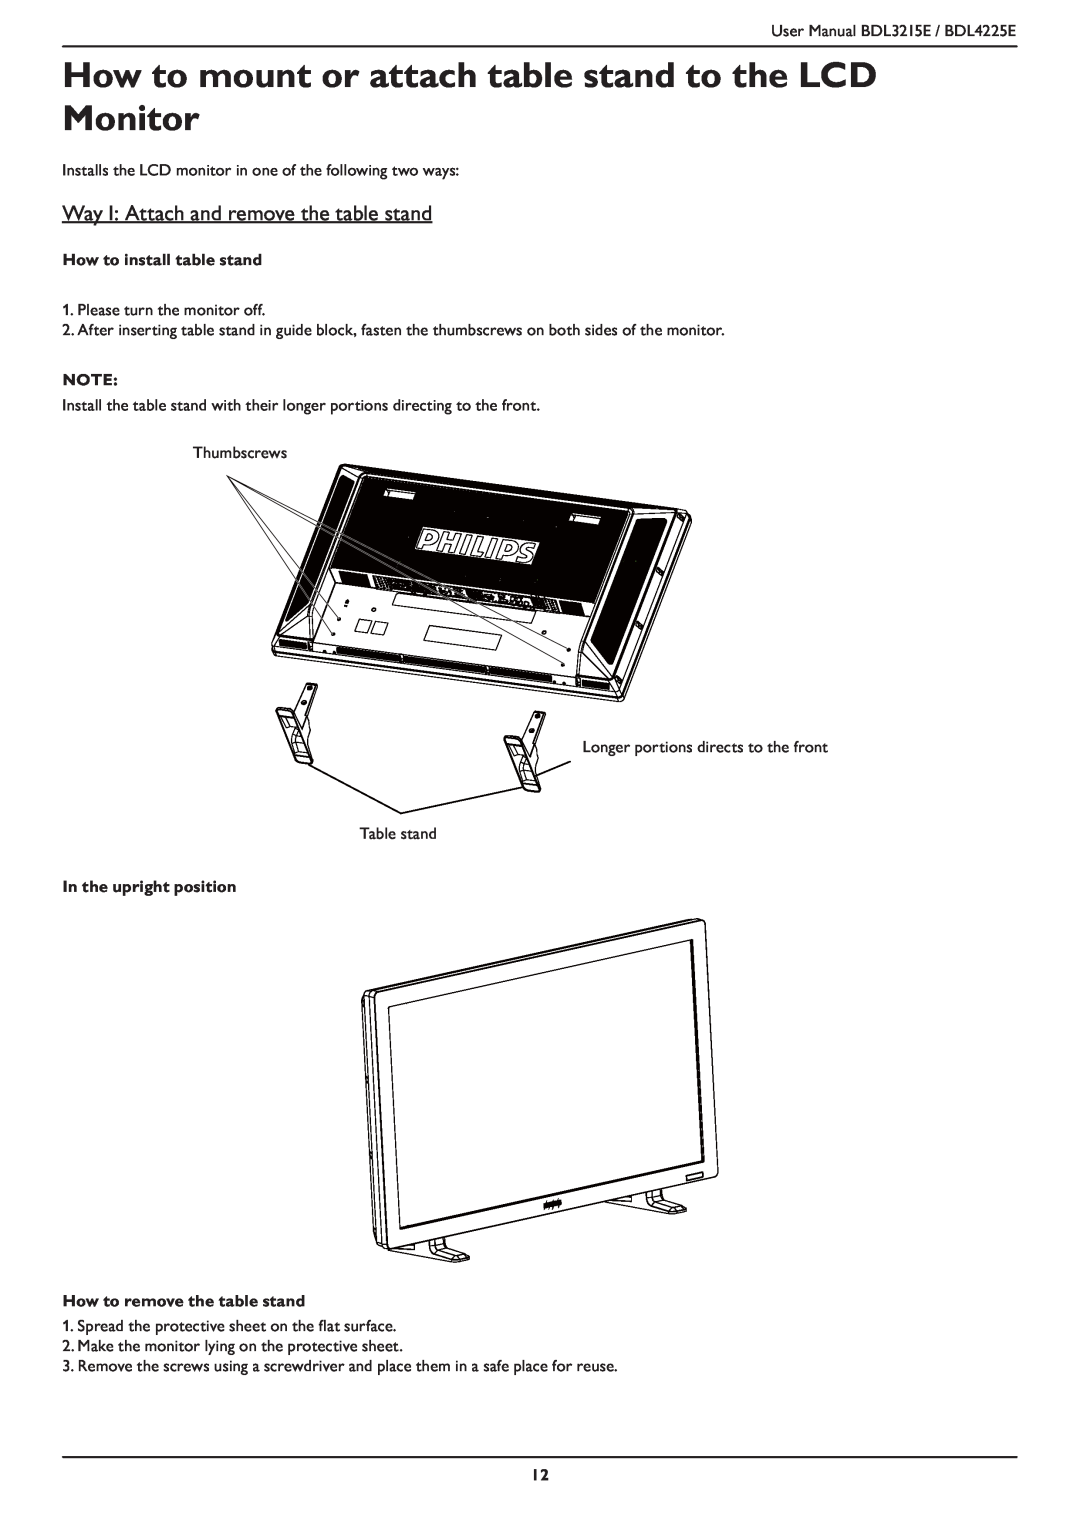 Philips BDL3215E, BDL4225E Way I: Attach and remove the table stand, How to install table stand, In the upright position 